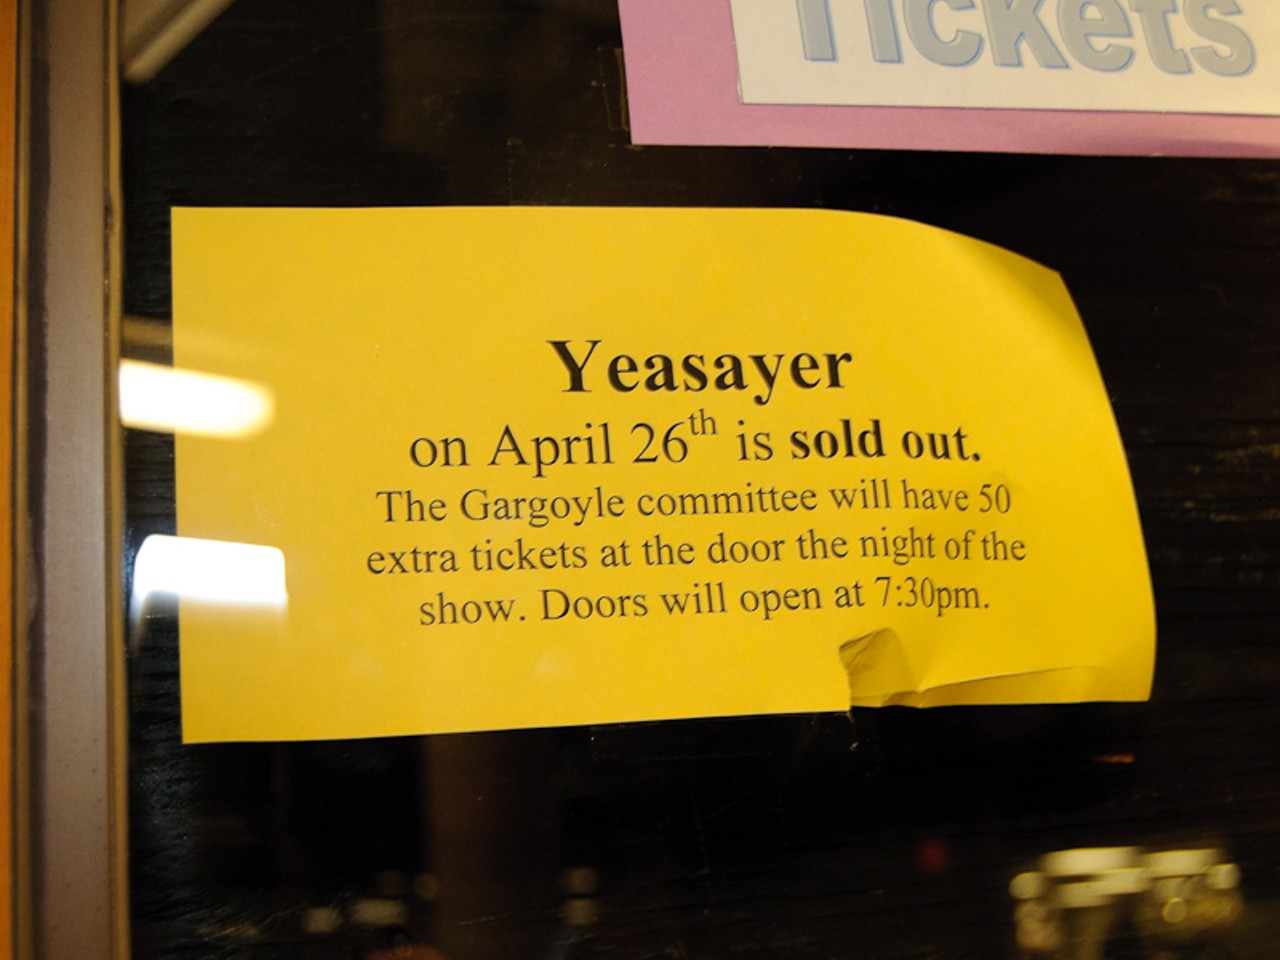 The Yeasayer show was indeed sold out, and the Edison Box Office indicates there would be 50 tickets available at the door - no mention that they were apparently reserved for students.